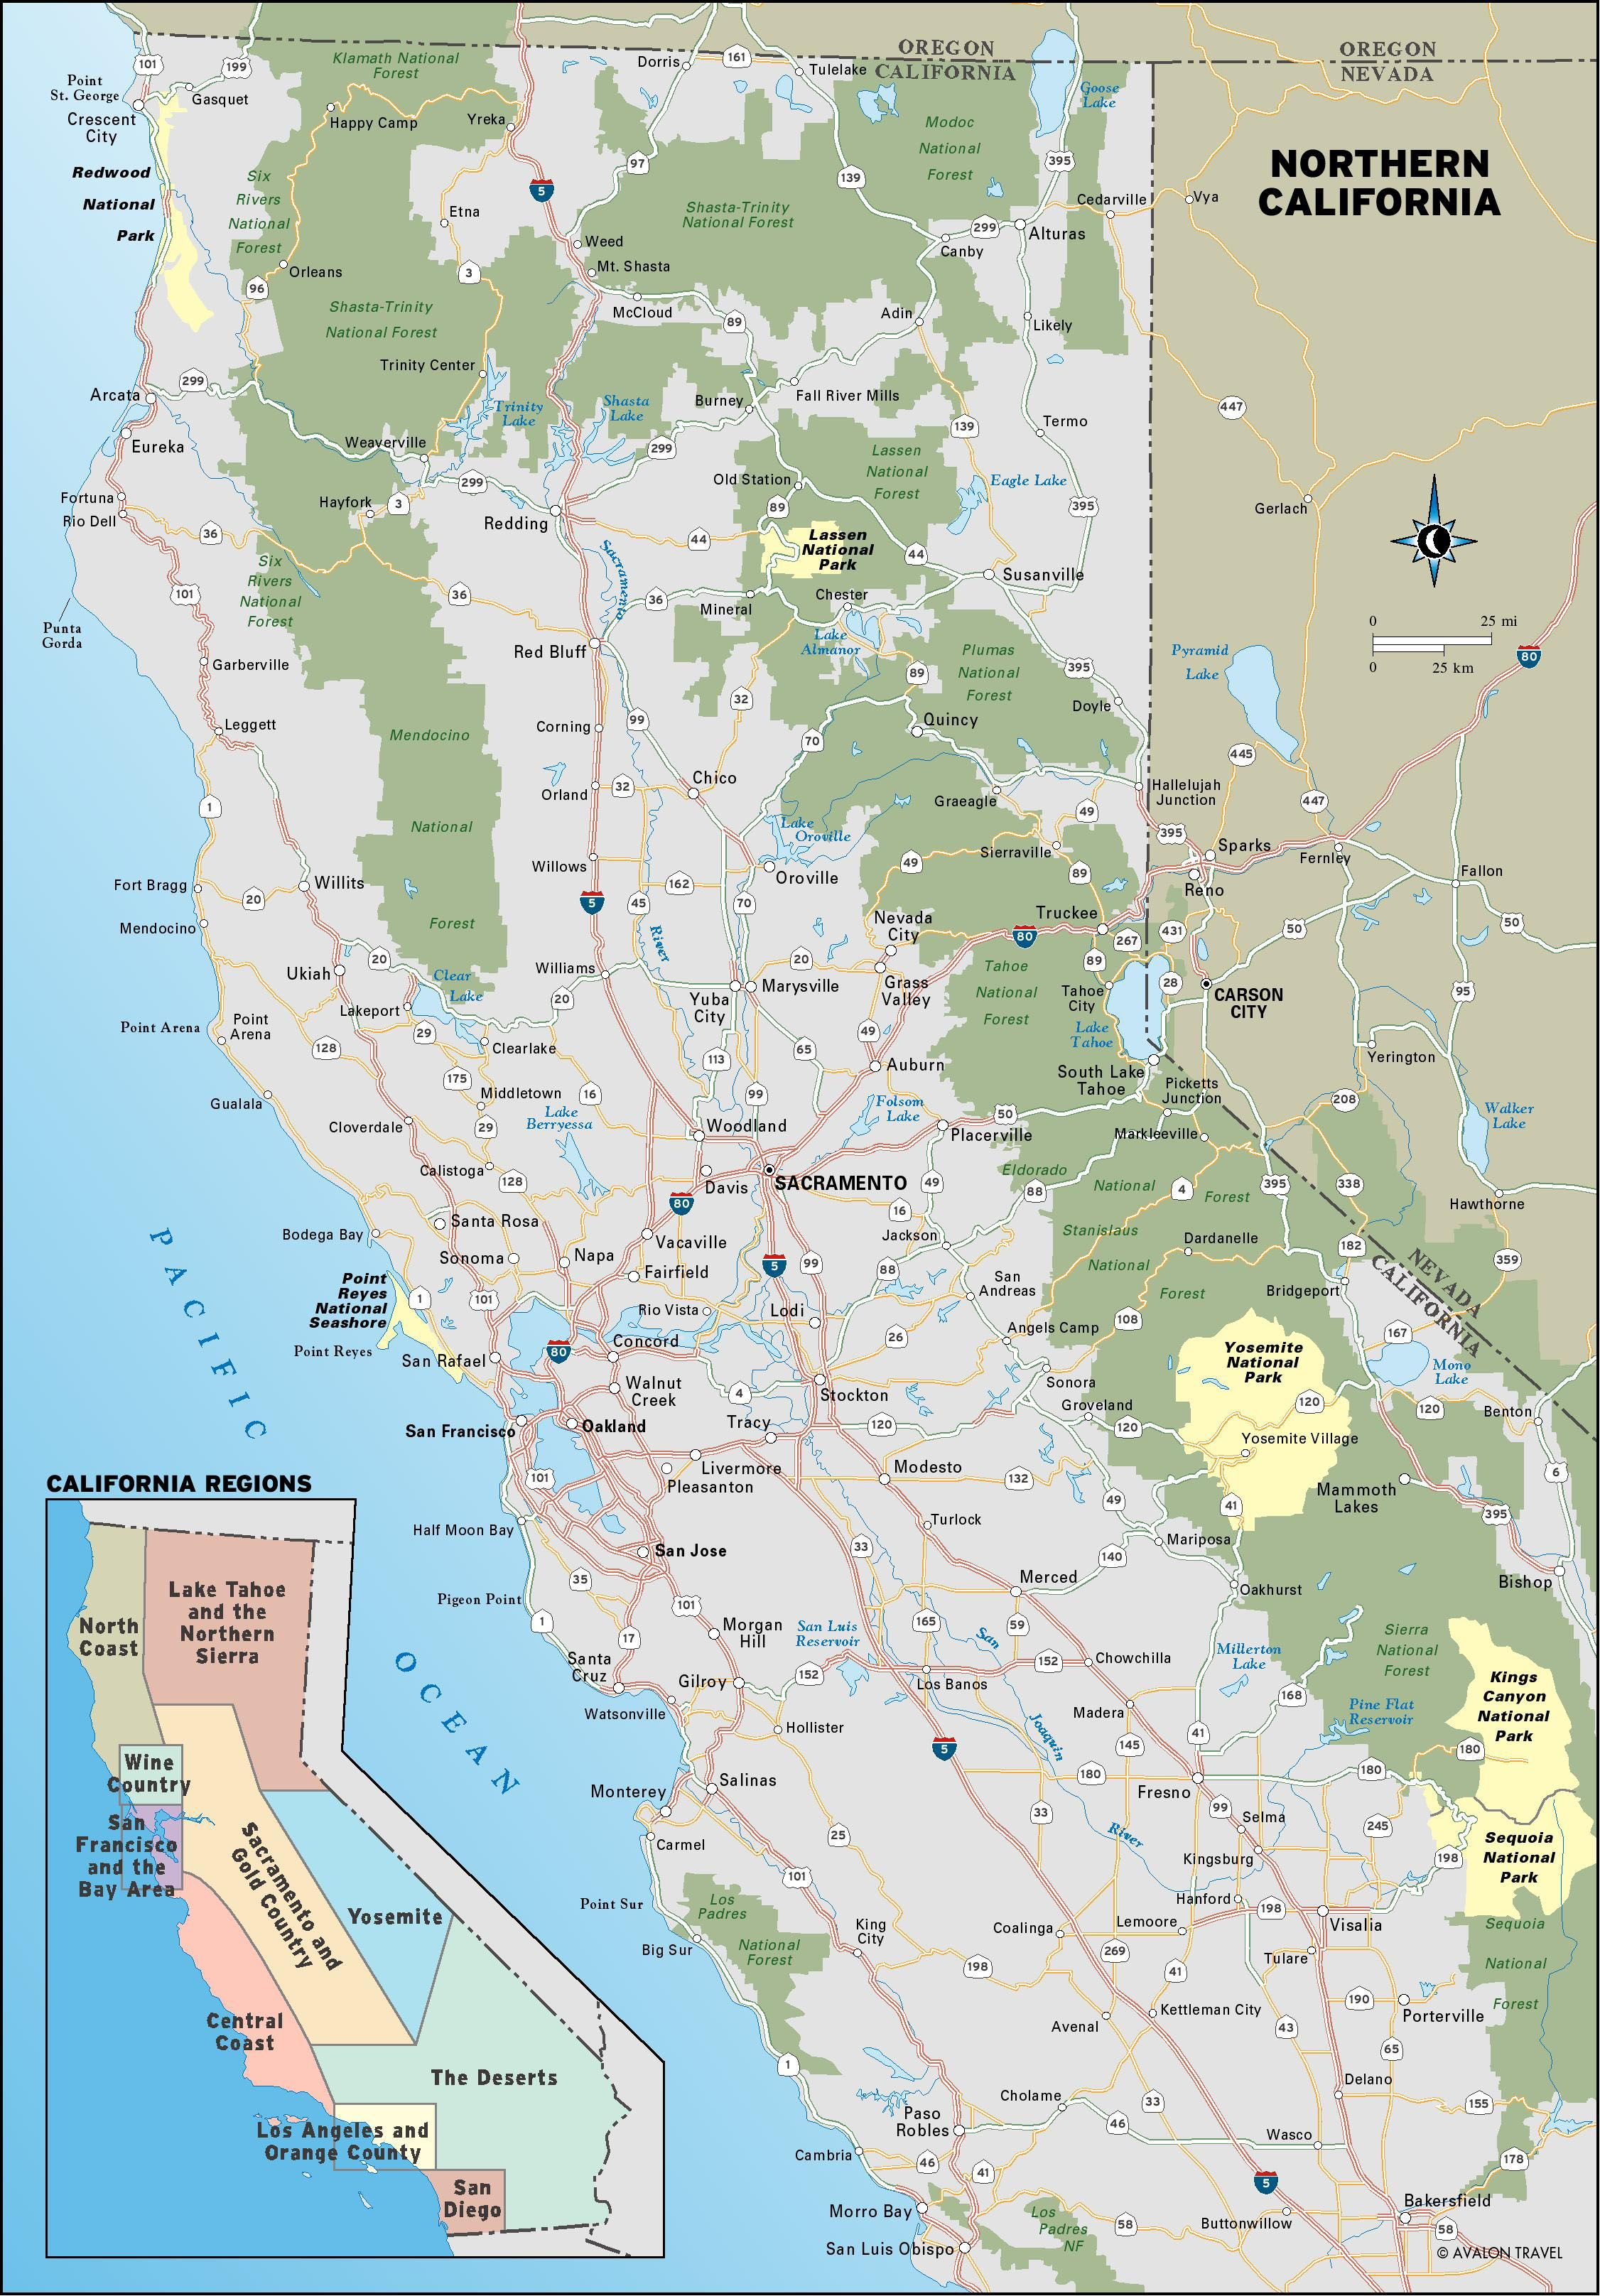 Pinstacy Elizabeth On Places I&amp;#039;d Like To Go In 2019 | Pinterest - Northern California Road Trip Map